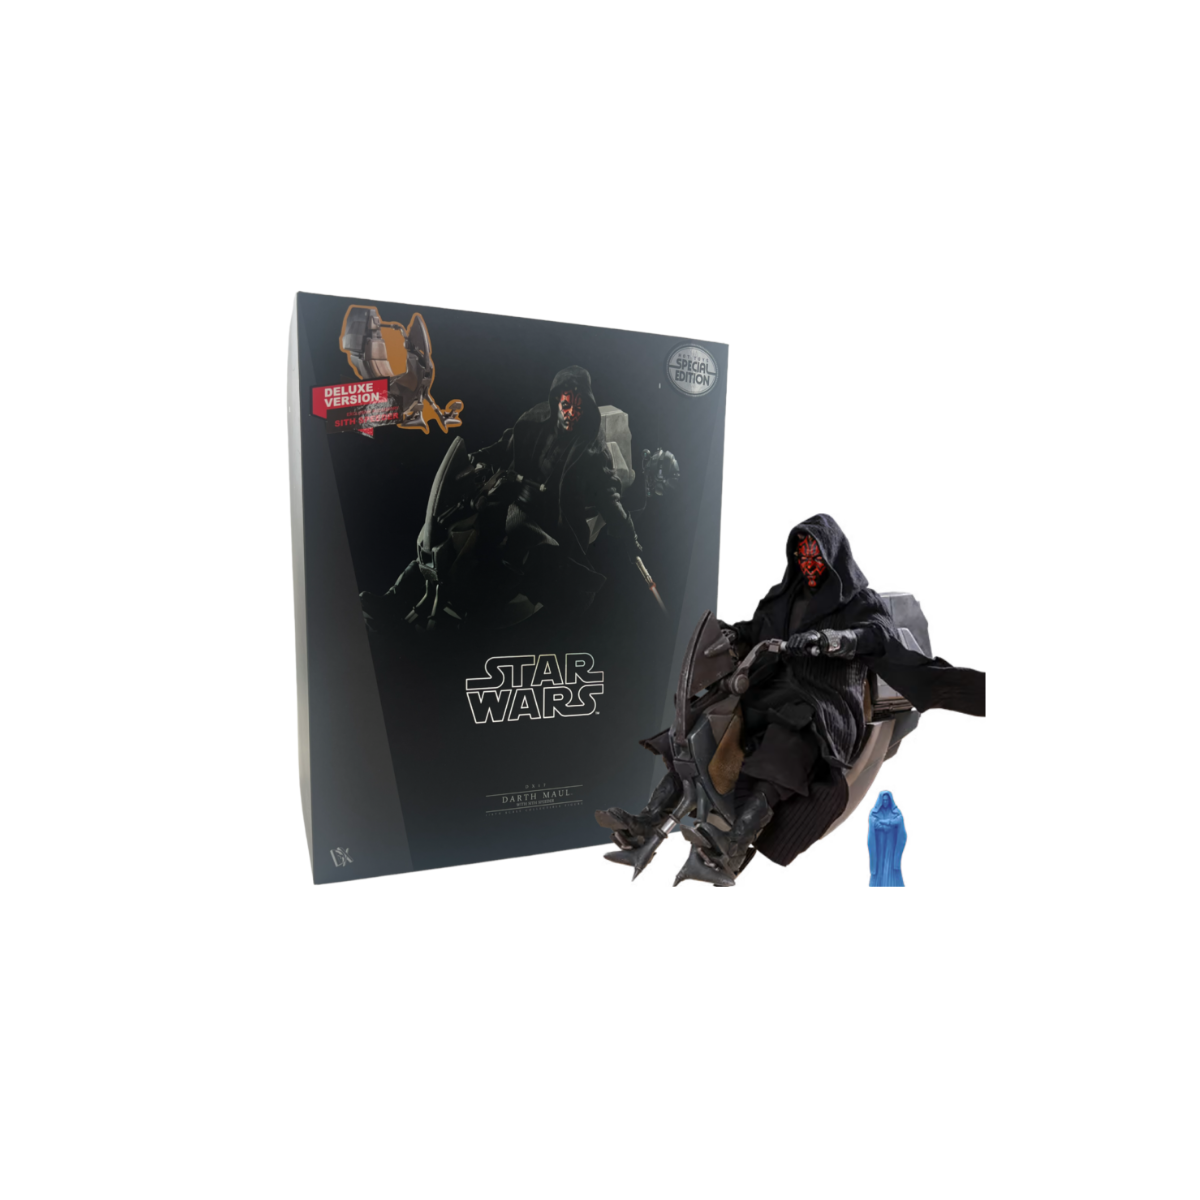 Star Wars Episode I The Phantom Menace Darth Maul with Sith Speeder Special Edition